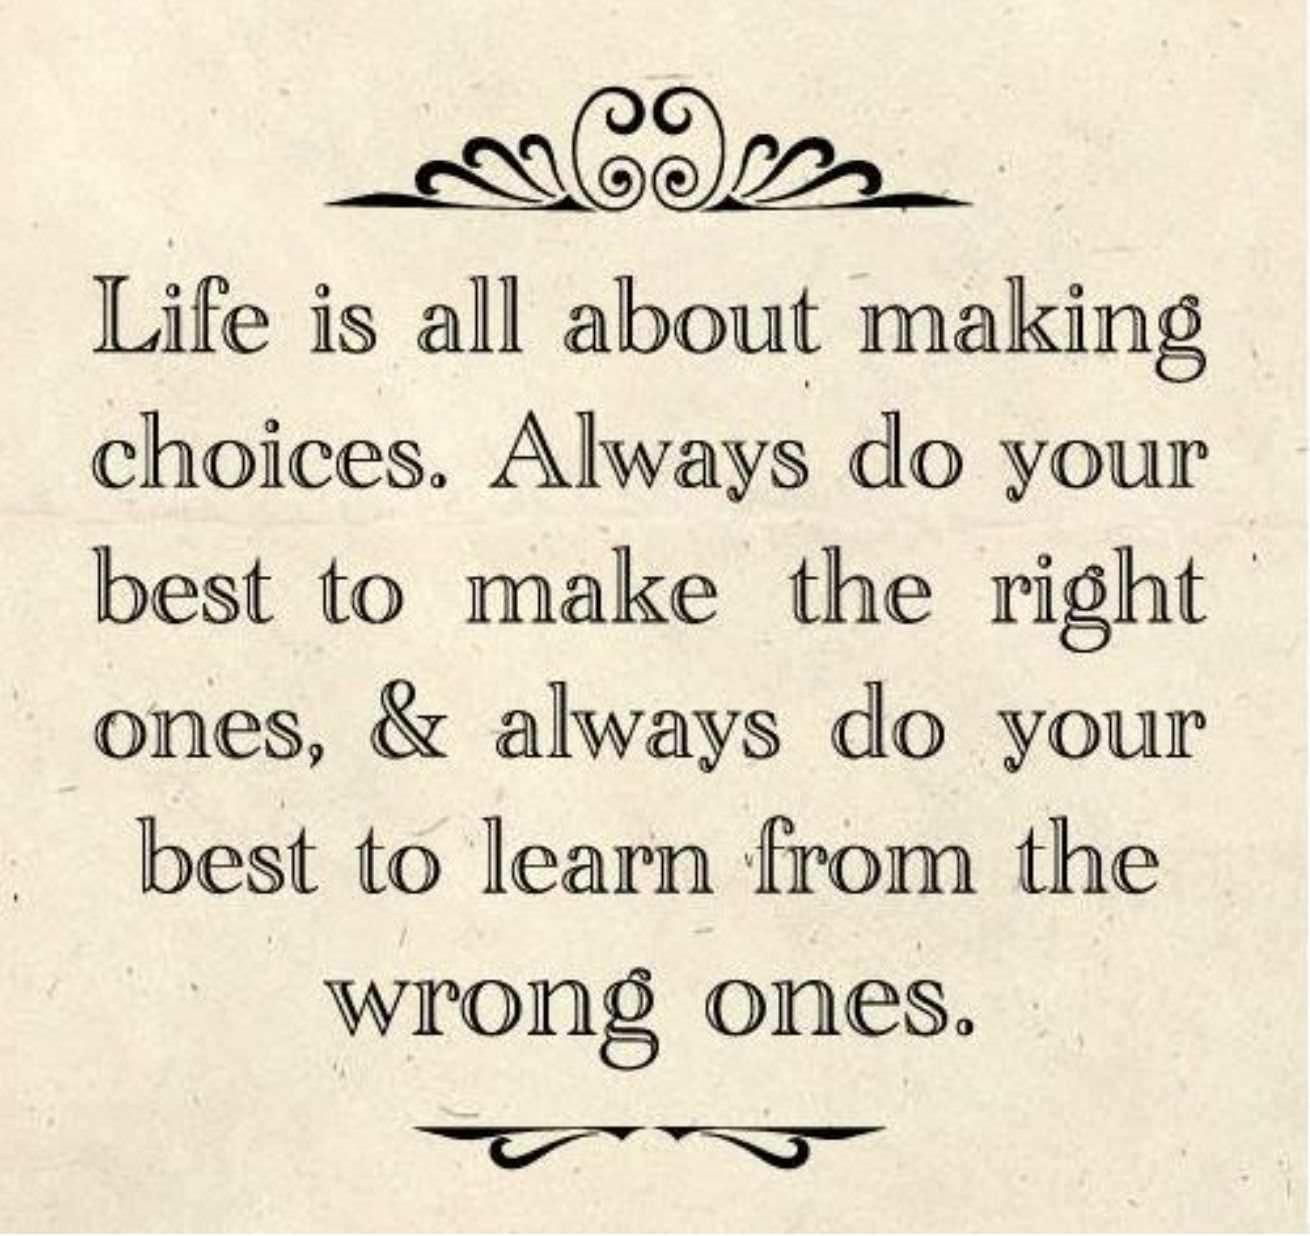 Life is all about making choices - Living Fit Lifestyle